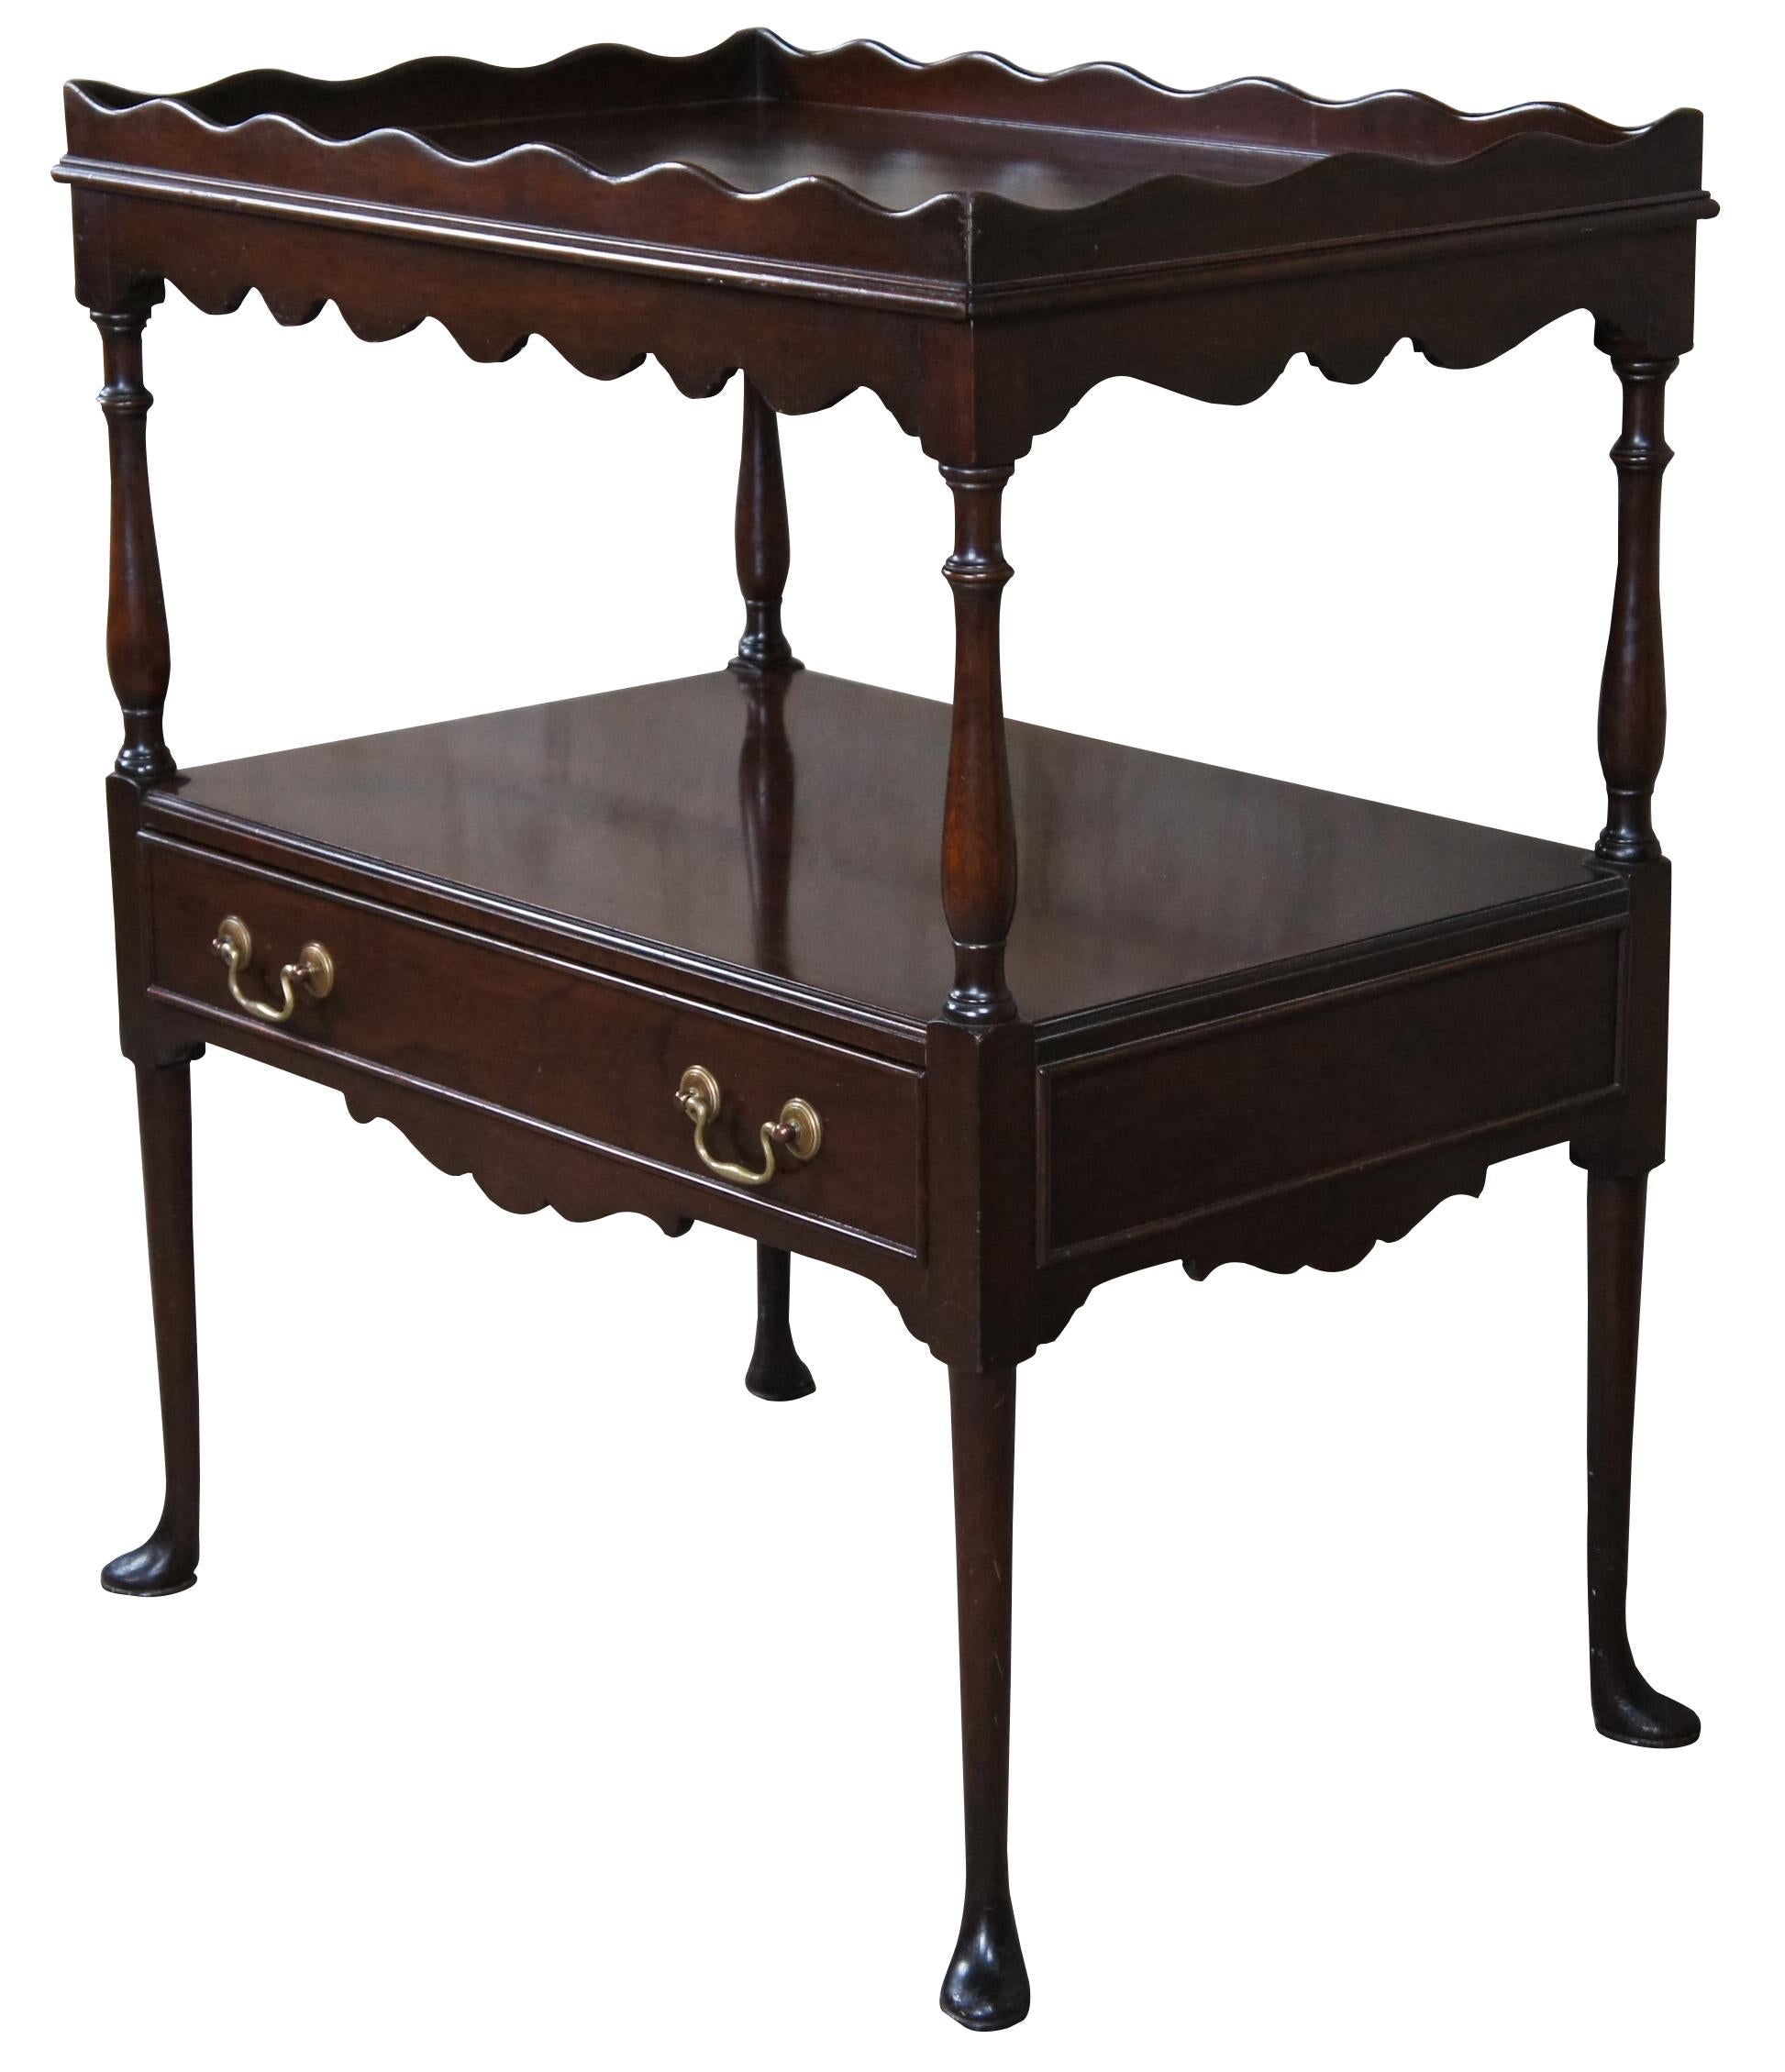 Vintage Kittinger Georgian two tier table. Made of mahogany featuring a serpentine gallery and skirt with one drawer and slipper feet.

The Kittinger Company was founded in Buffalo, New York, in 1866 as 